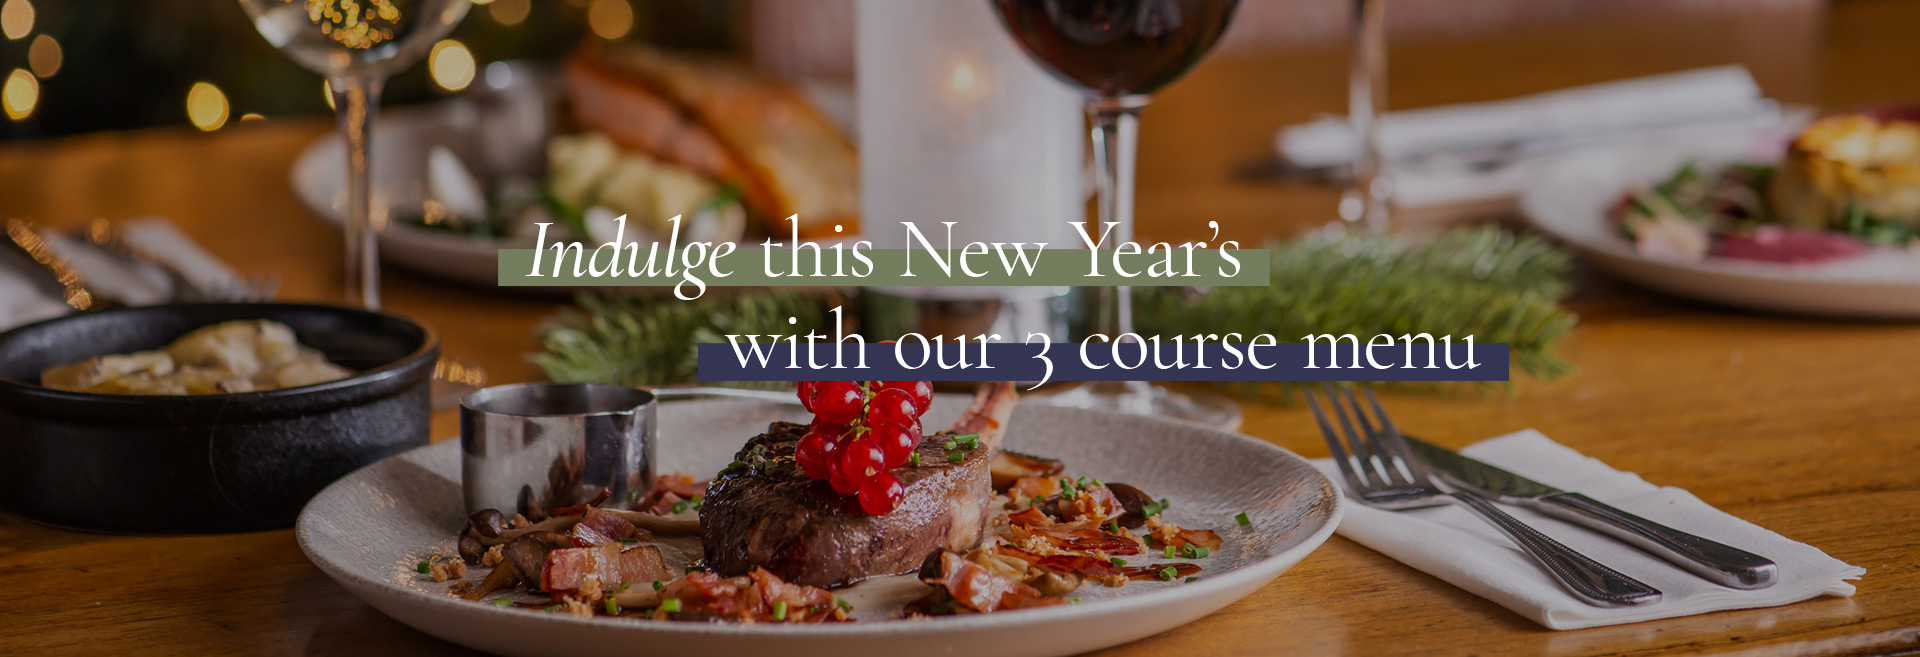 New Year's Menu at The White Horse 